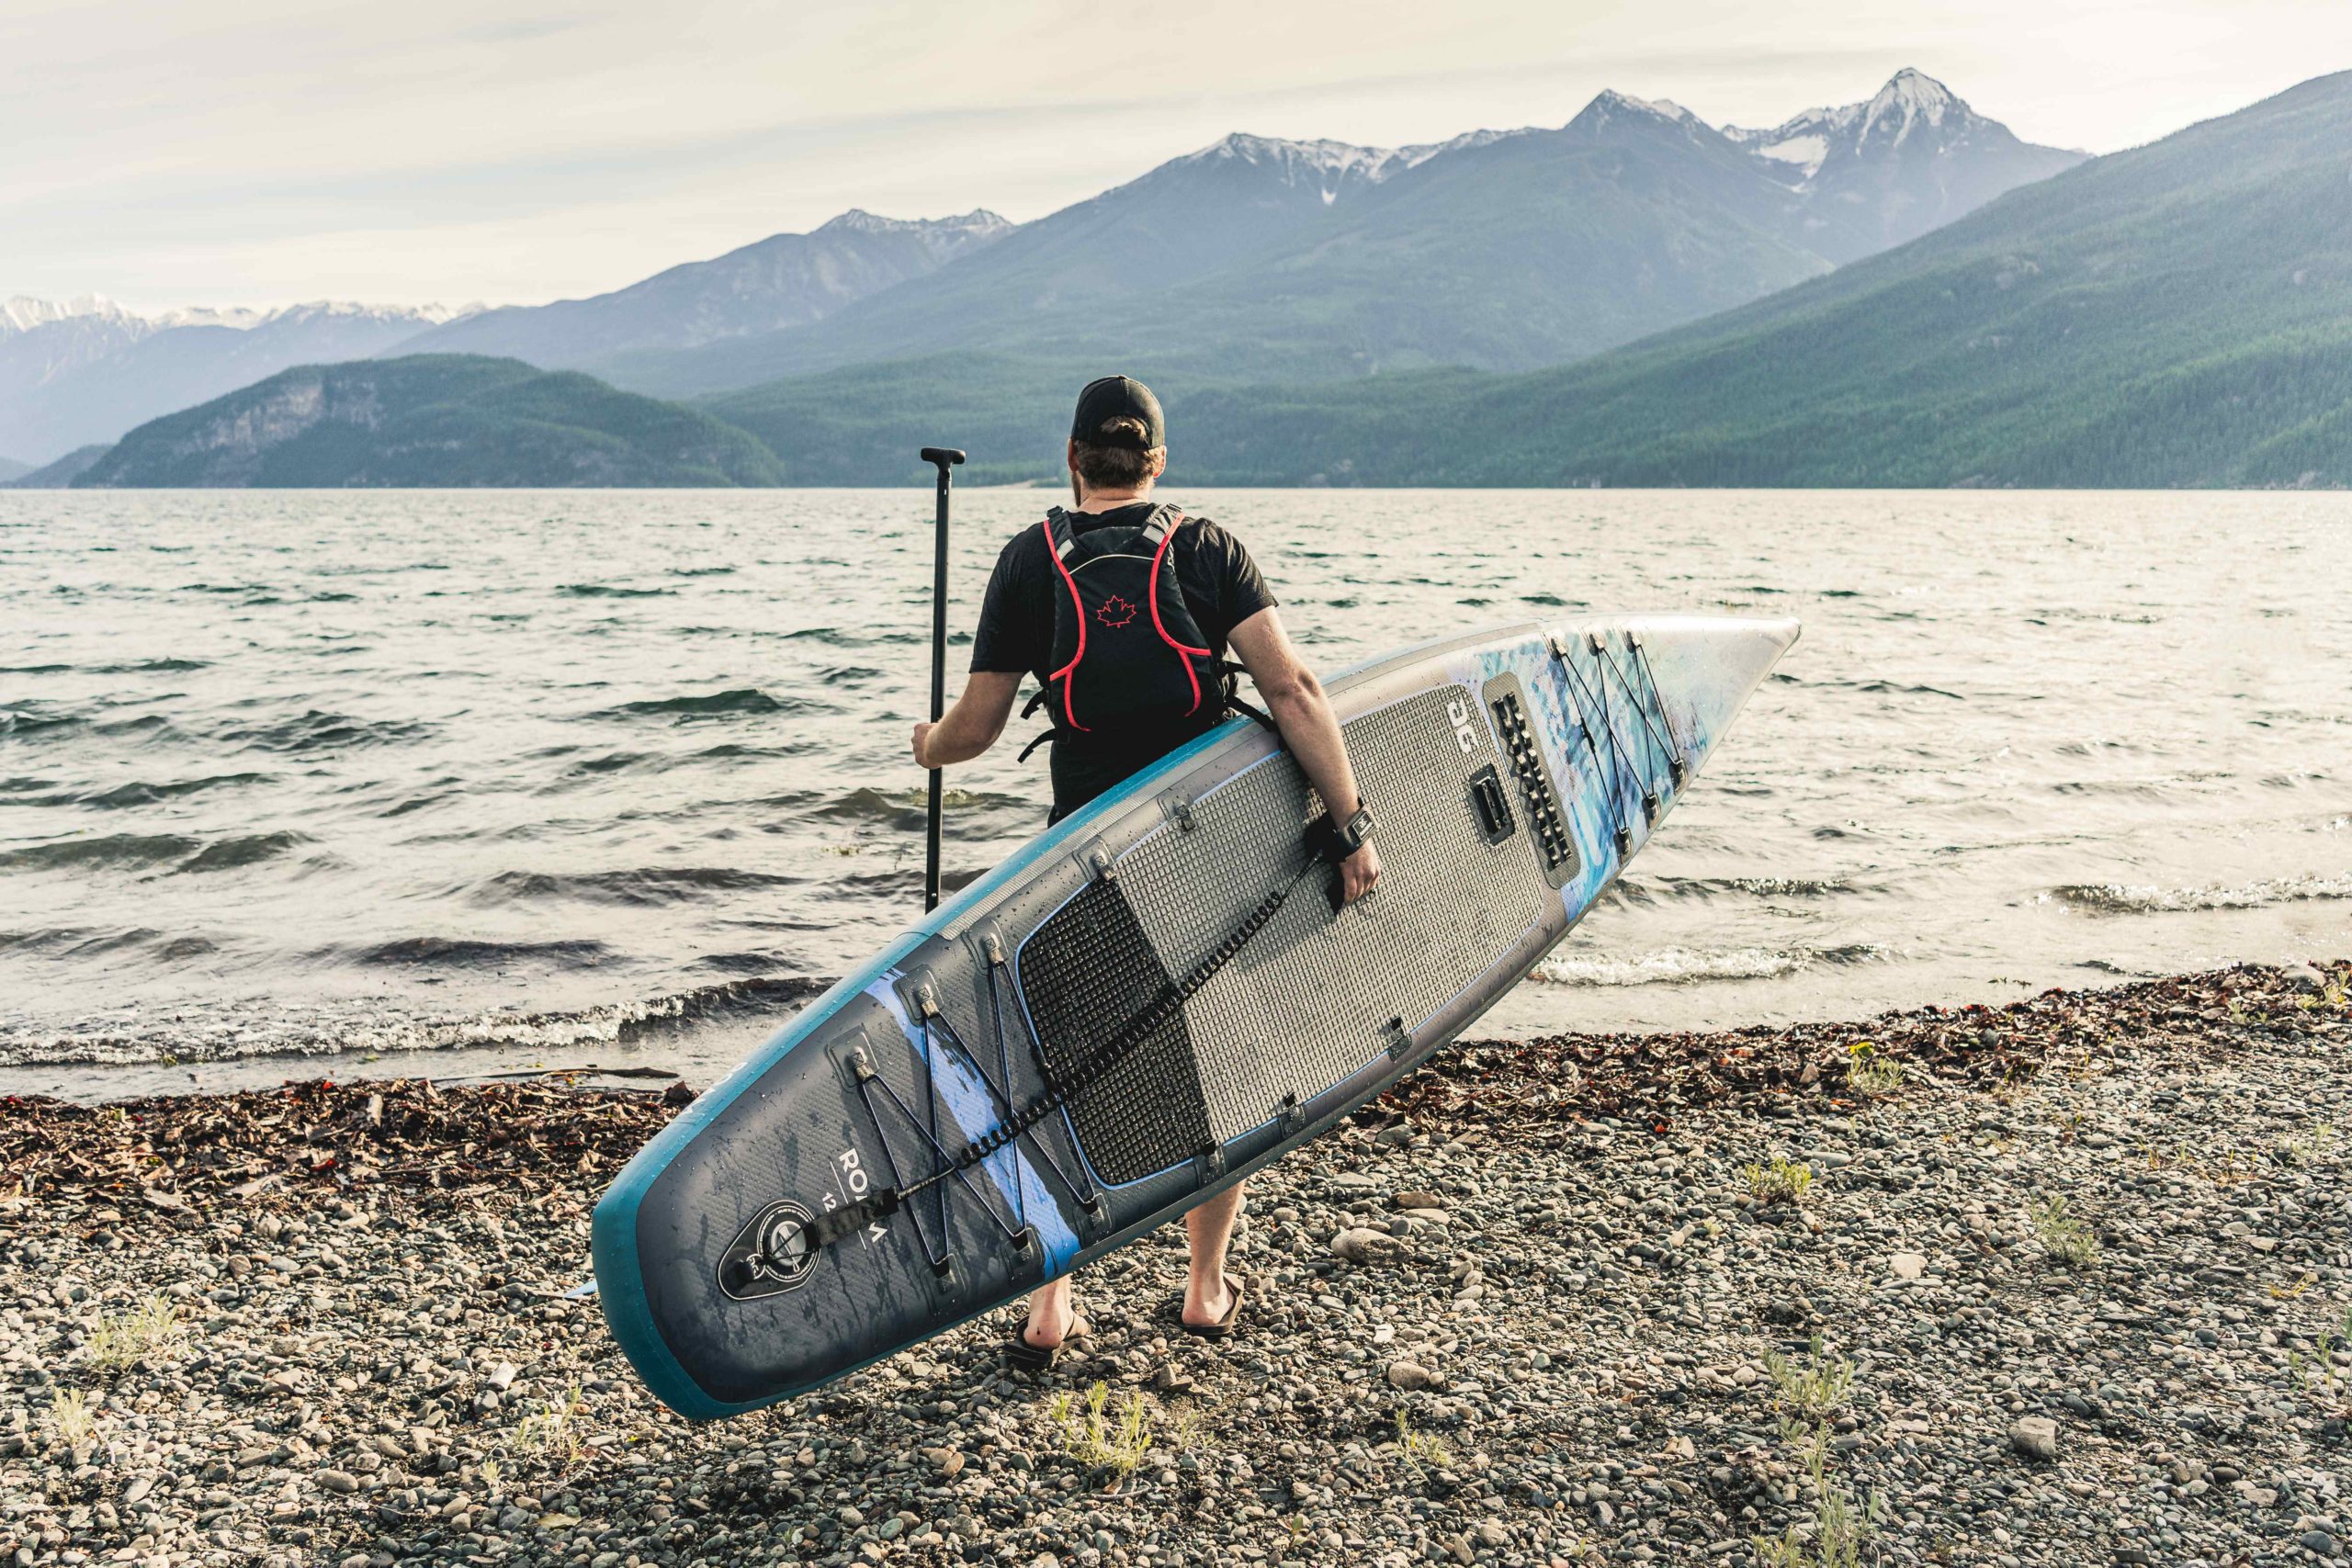 4 First Aid & Safety Tips You Need To Know Before a Paddle